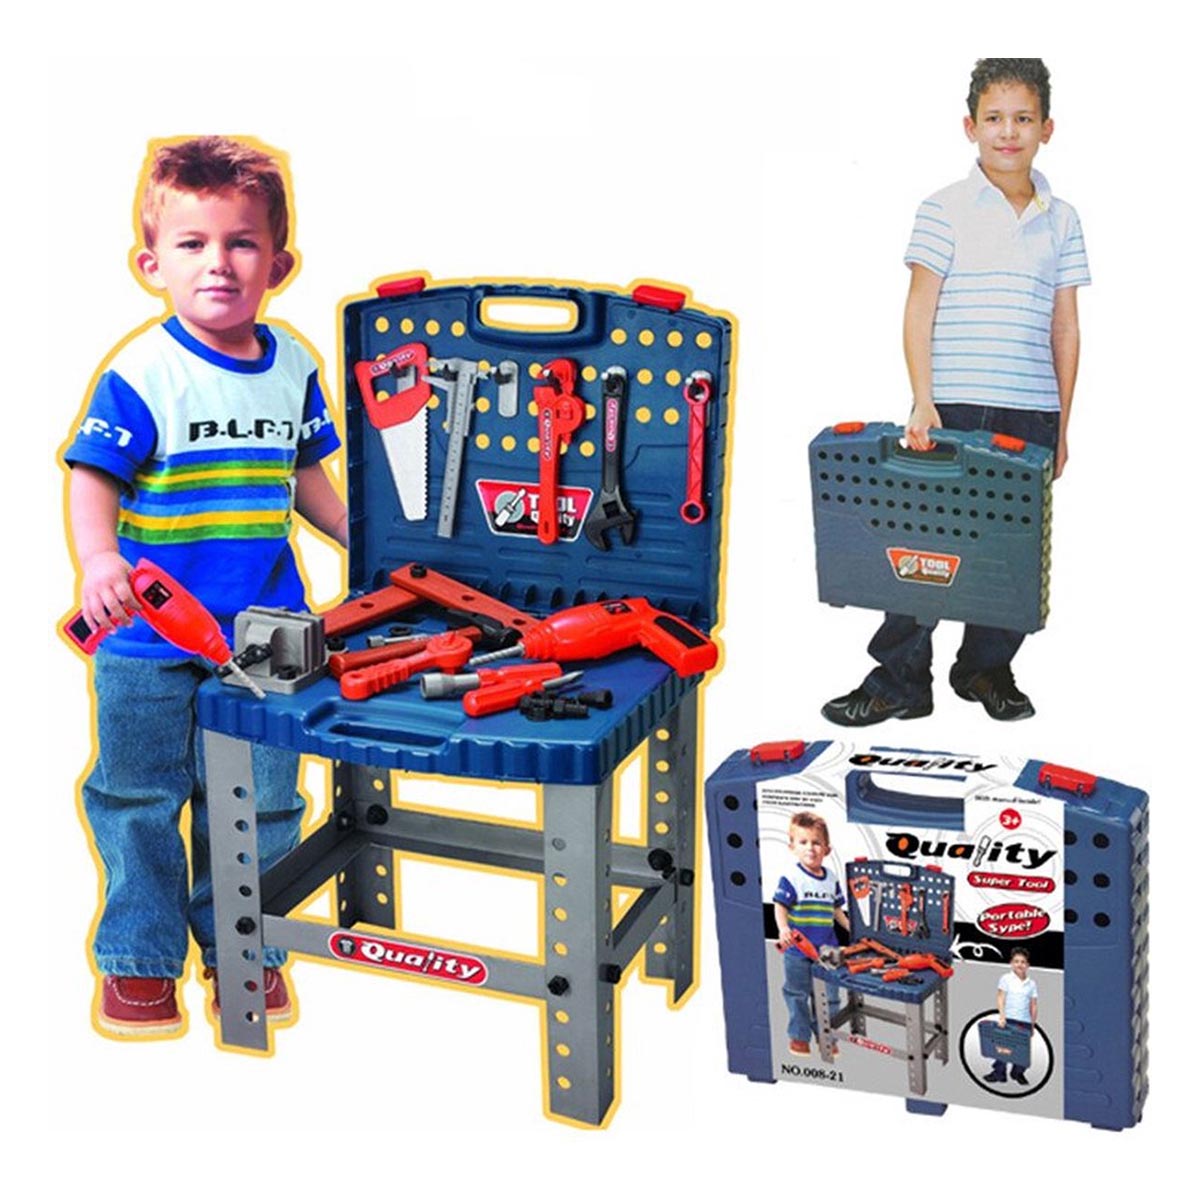 <tc>Ariko</tc> XL Workbench for children - toys - with working drill - in handy carrying case - with accessories - 67 parts - 70 cm high - Including 2 x Philips AA batteries